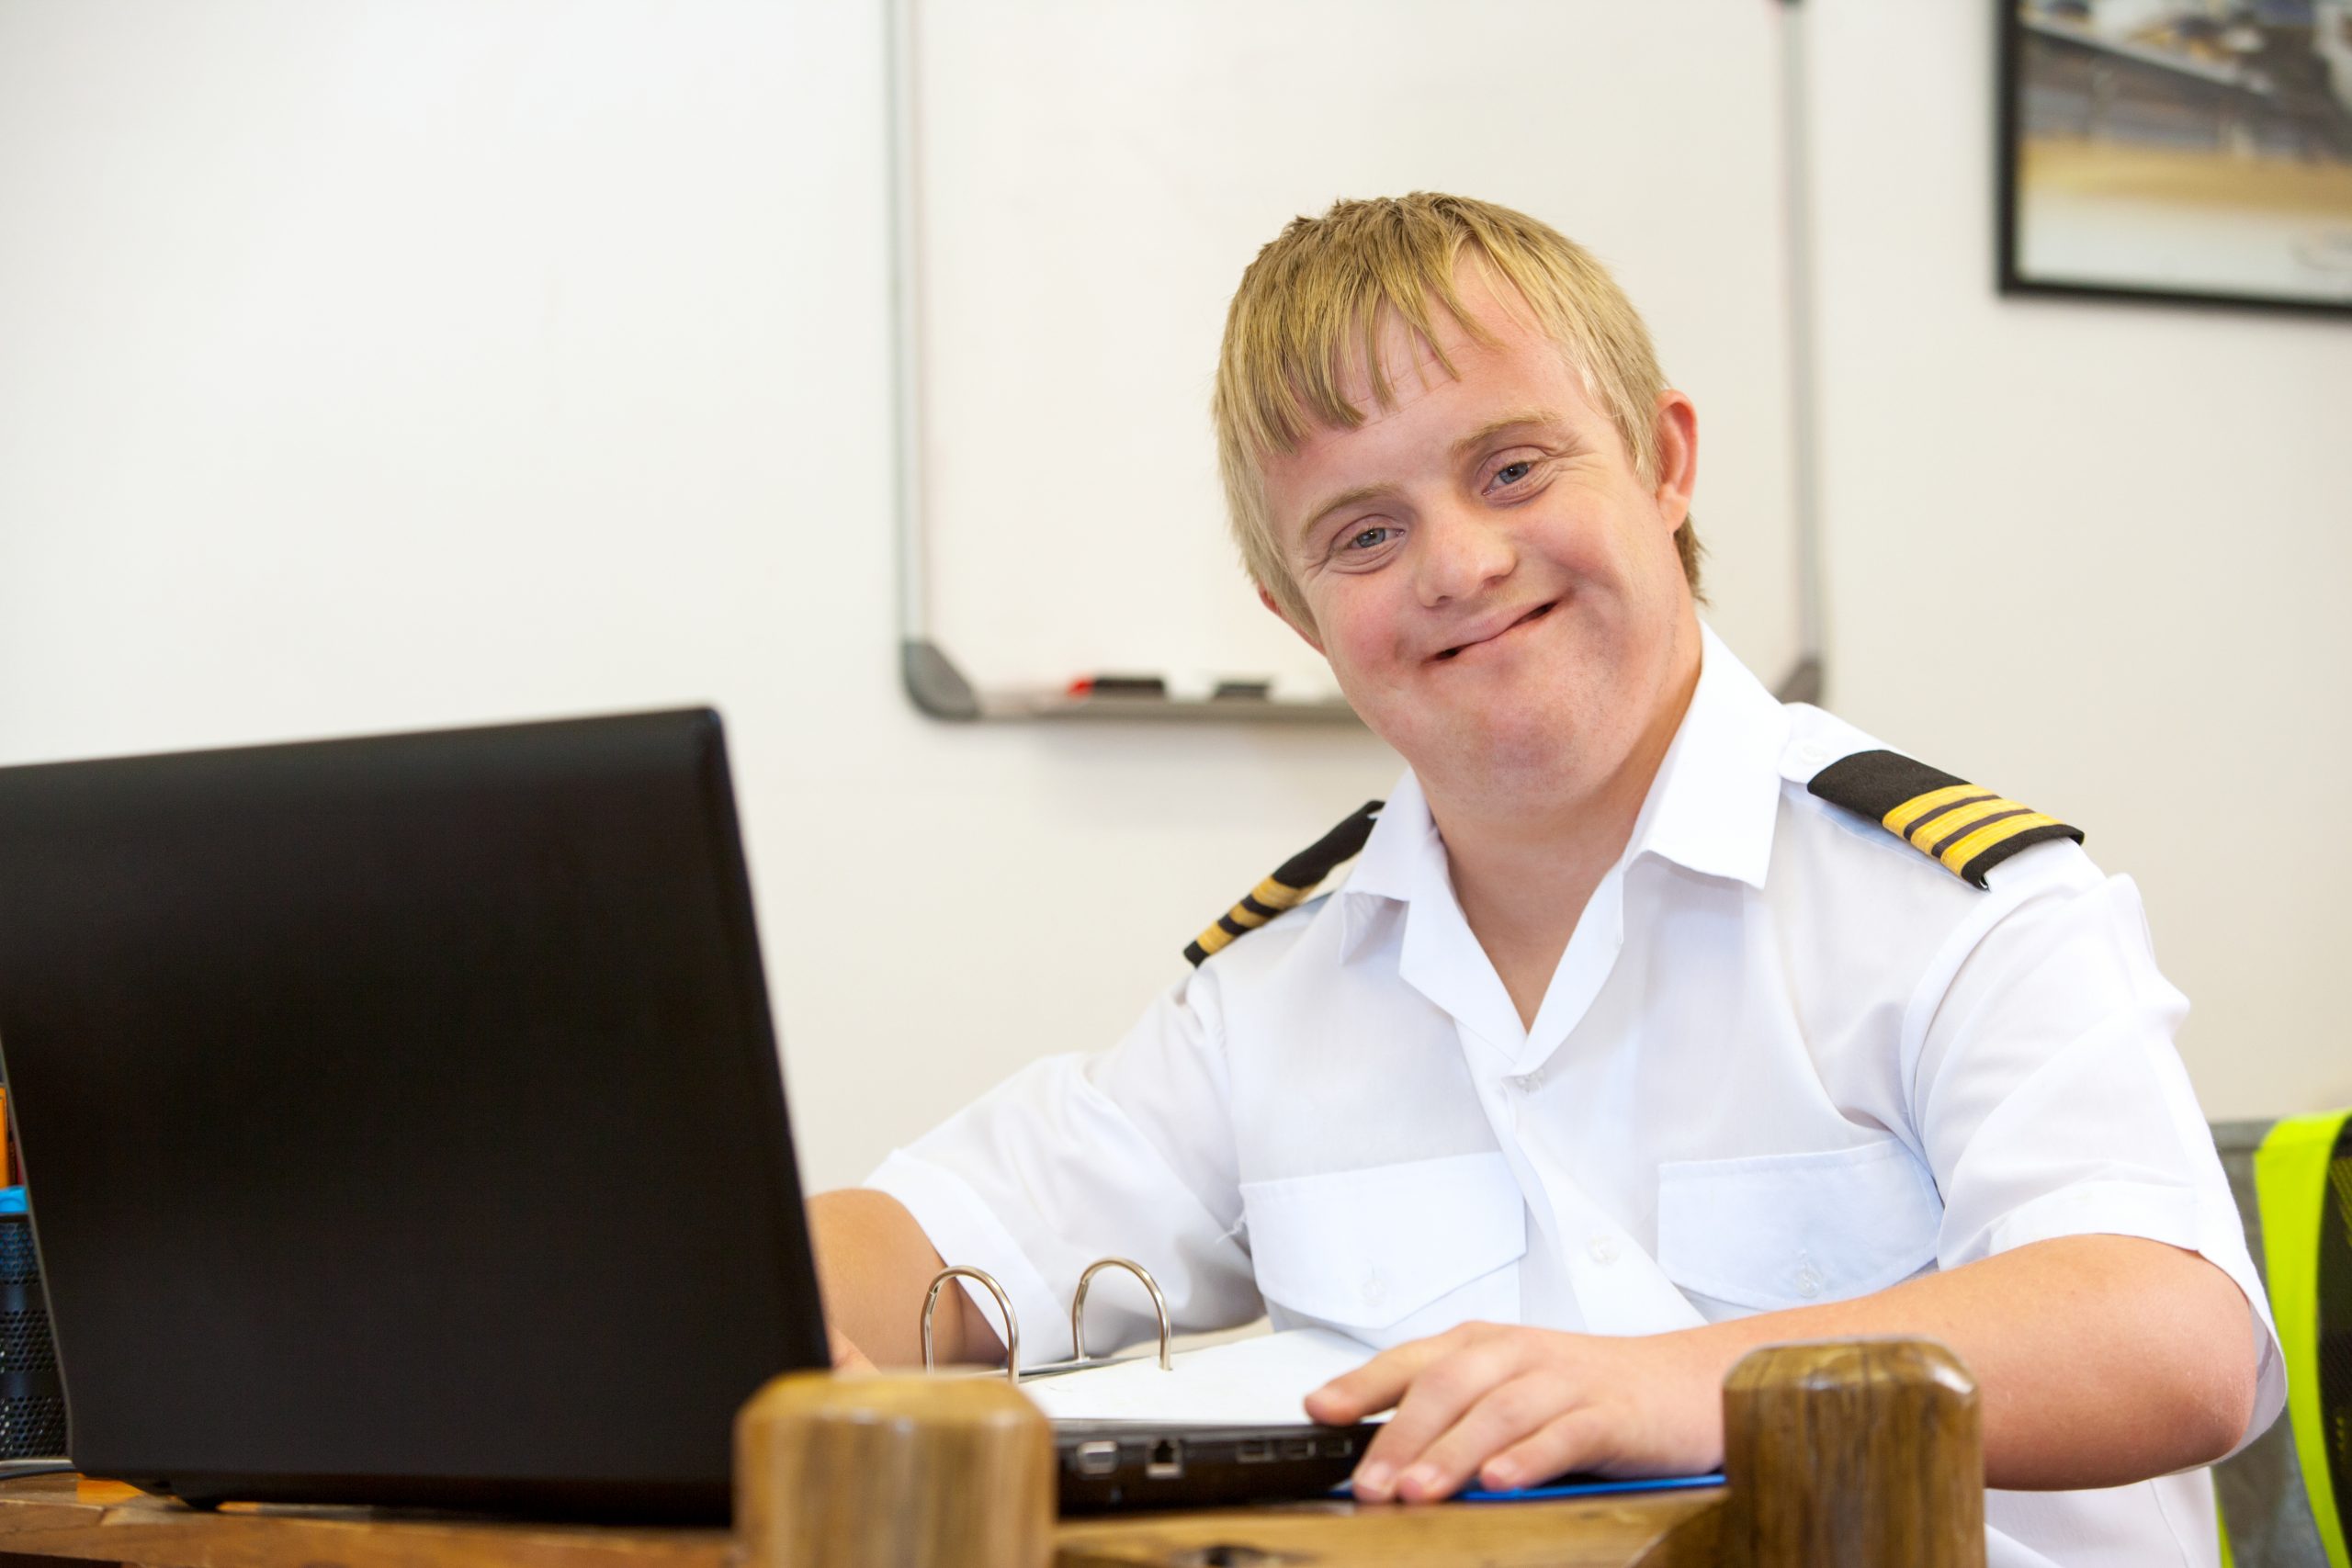 Man with learning disability and autism working on a laptop and wearing a police uniform